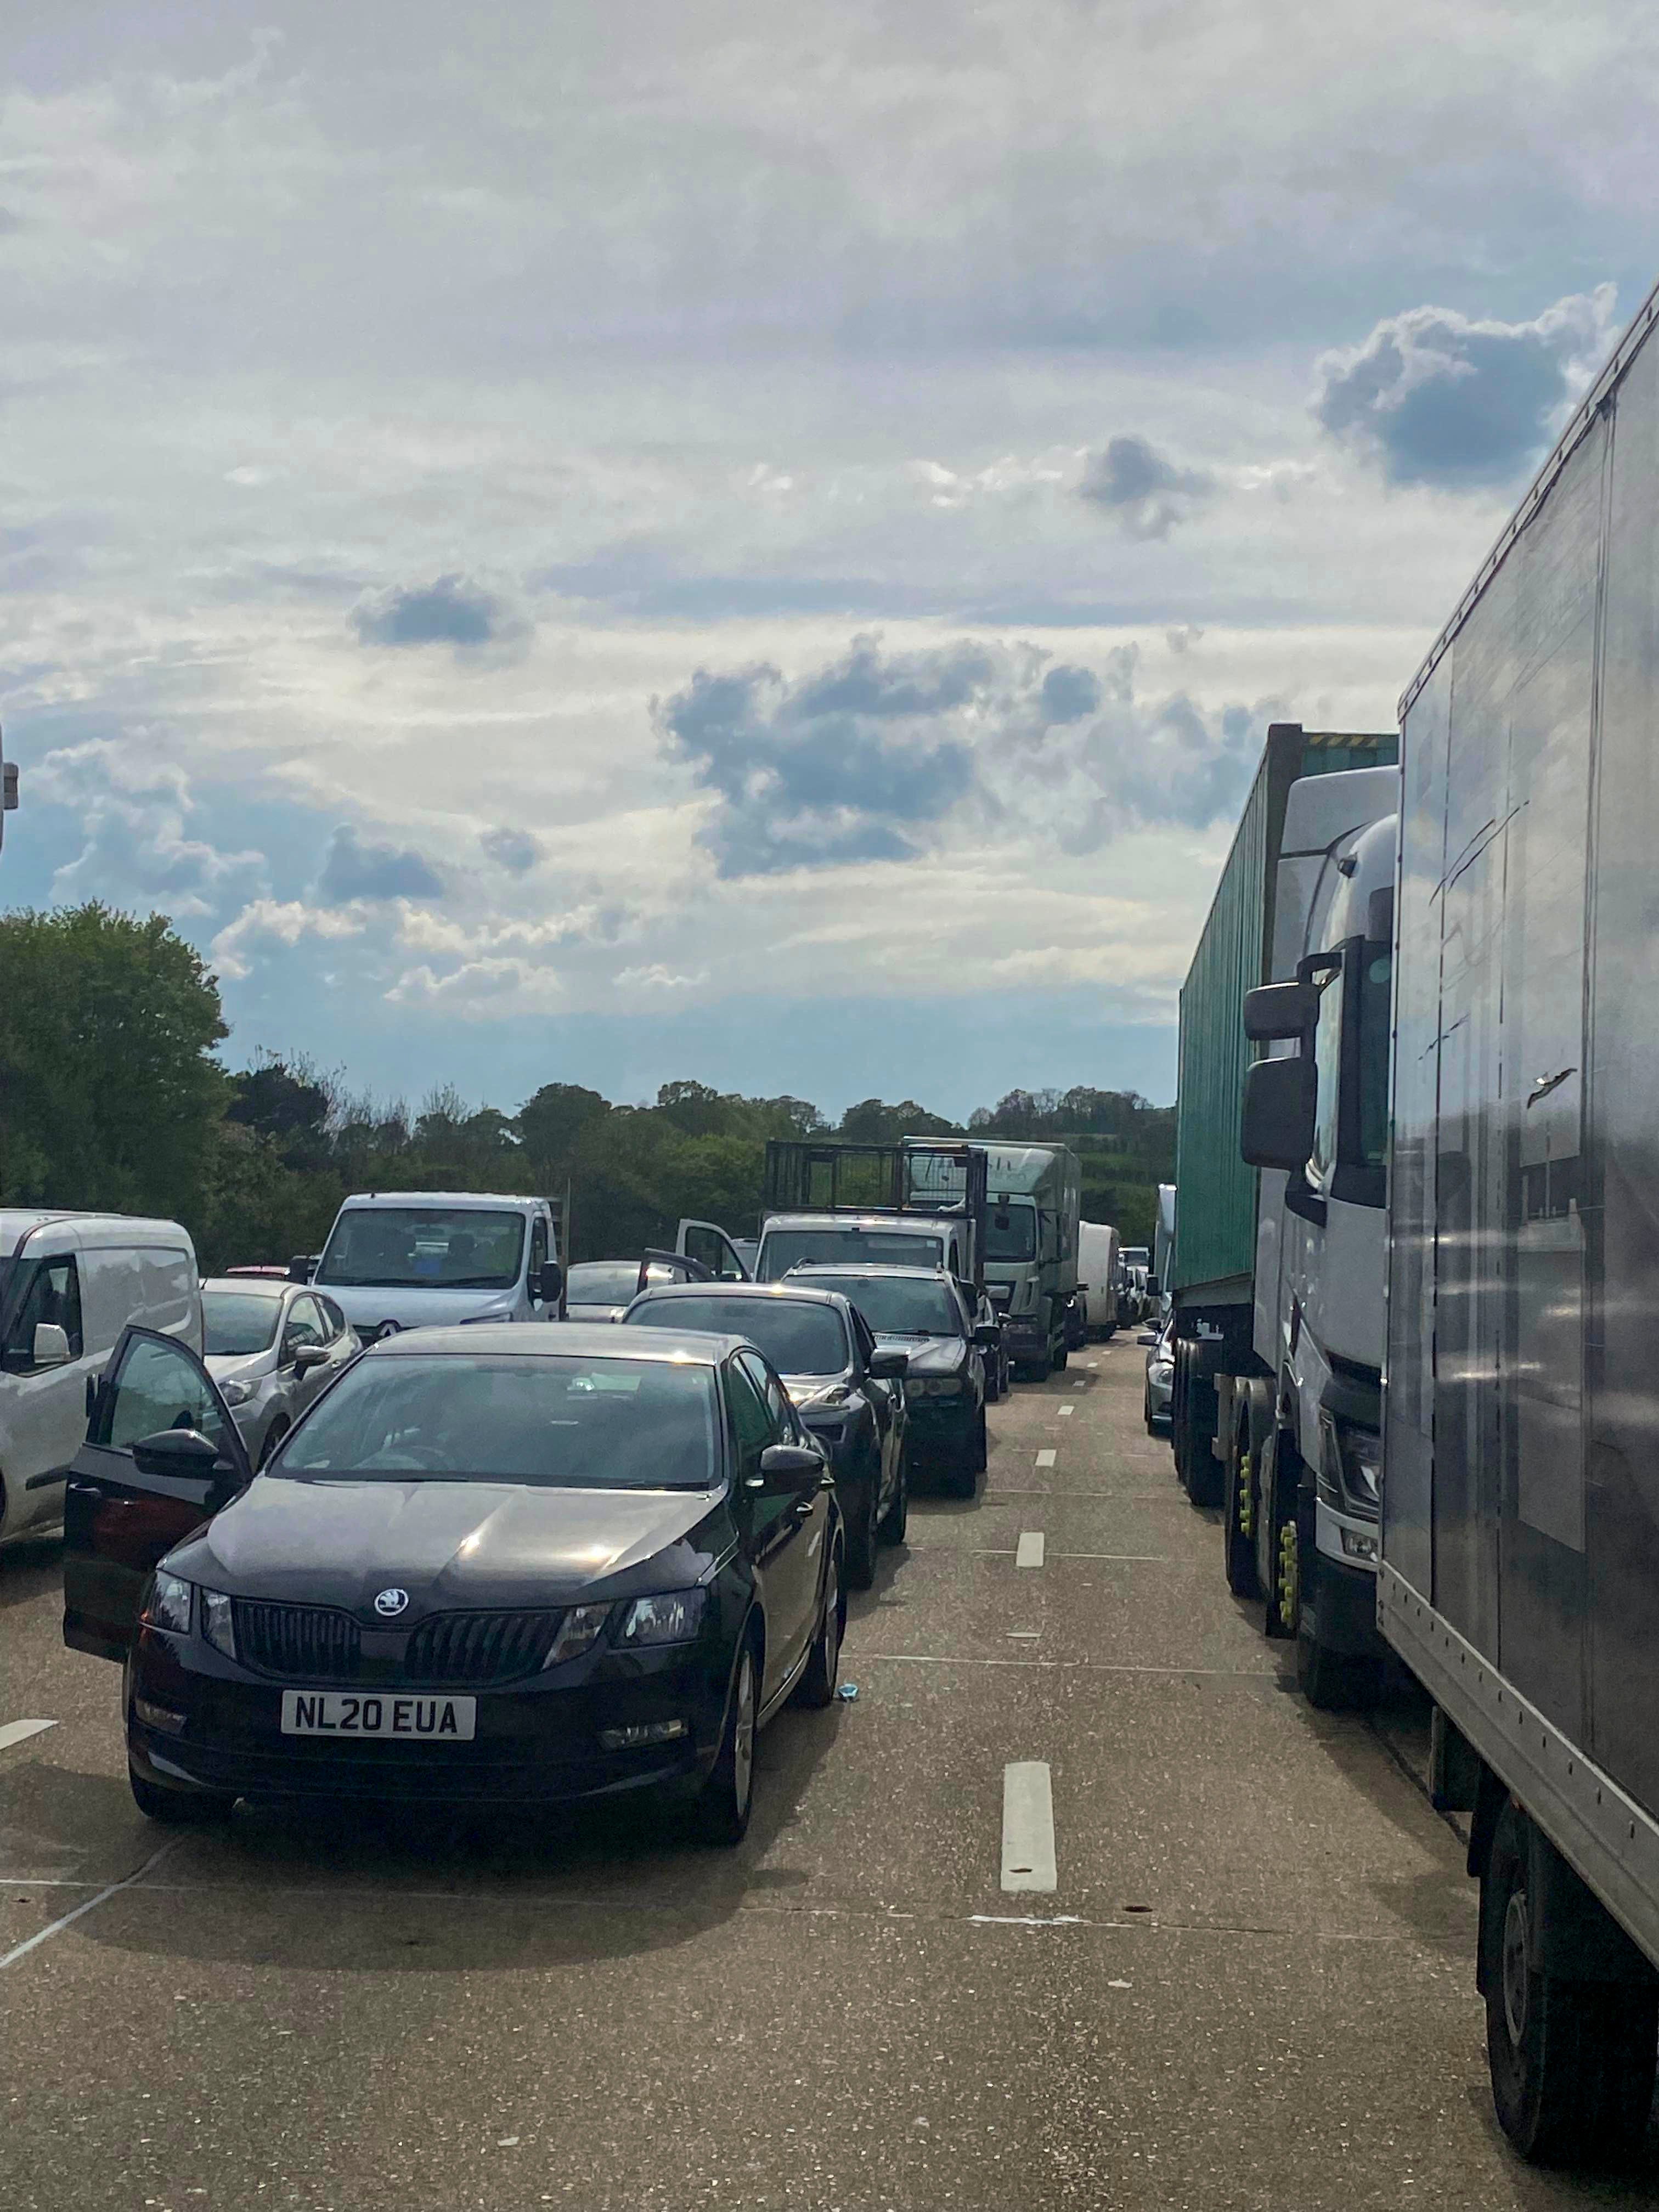 Vehicles stuck on the M25 motorway after an accident where cooking oil was spilt between junctions 24 and 25 on Wednesday